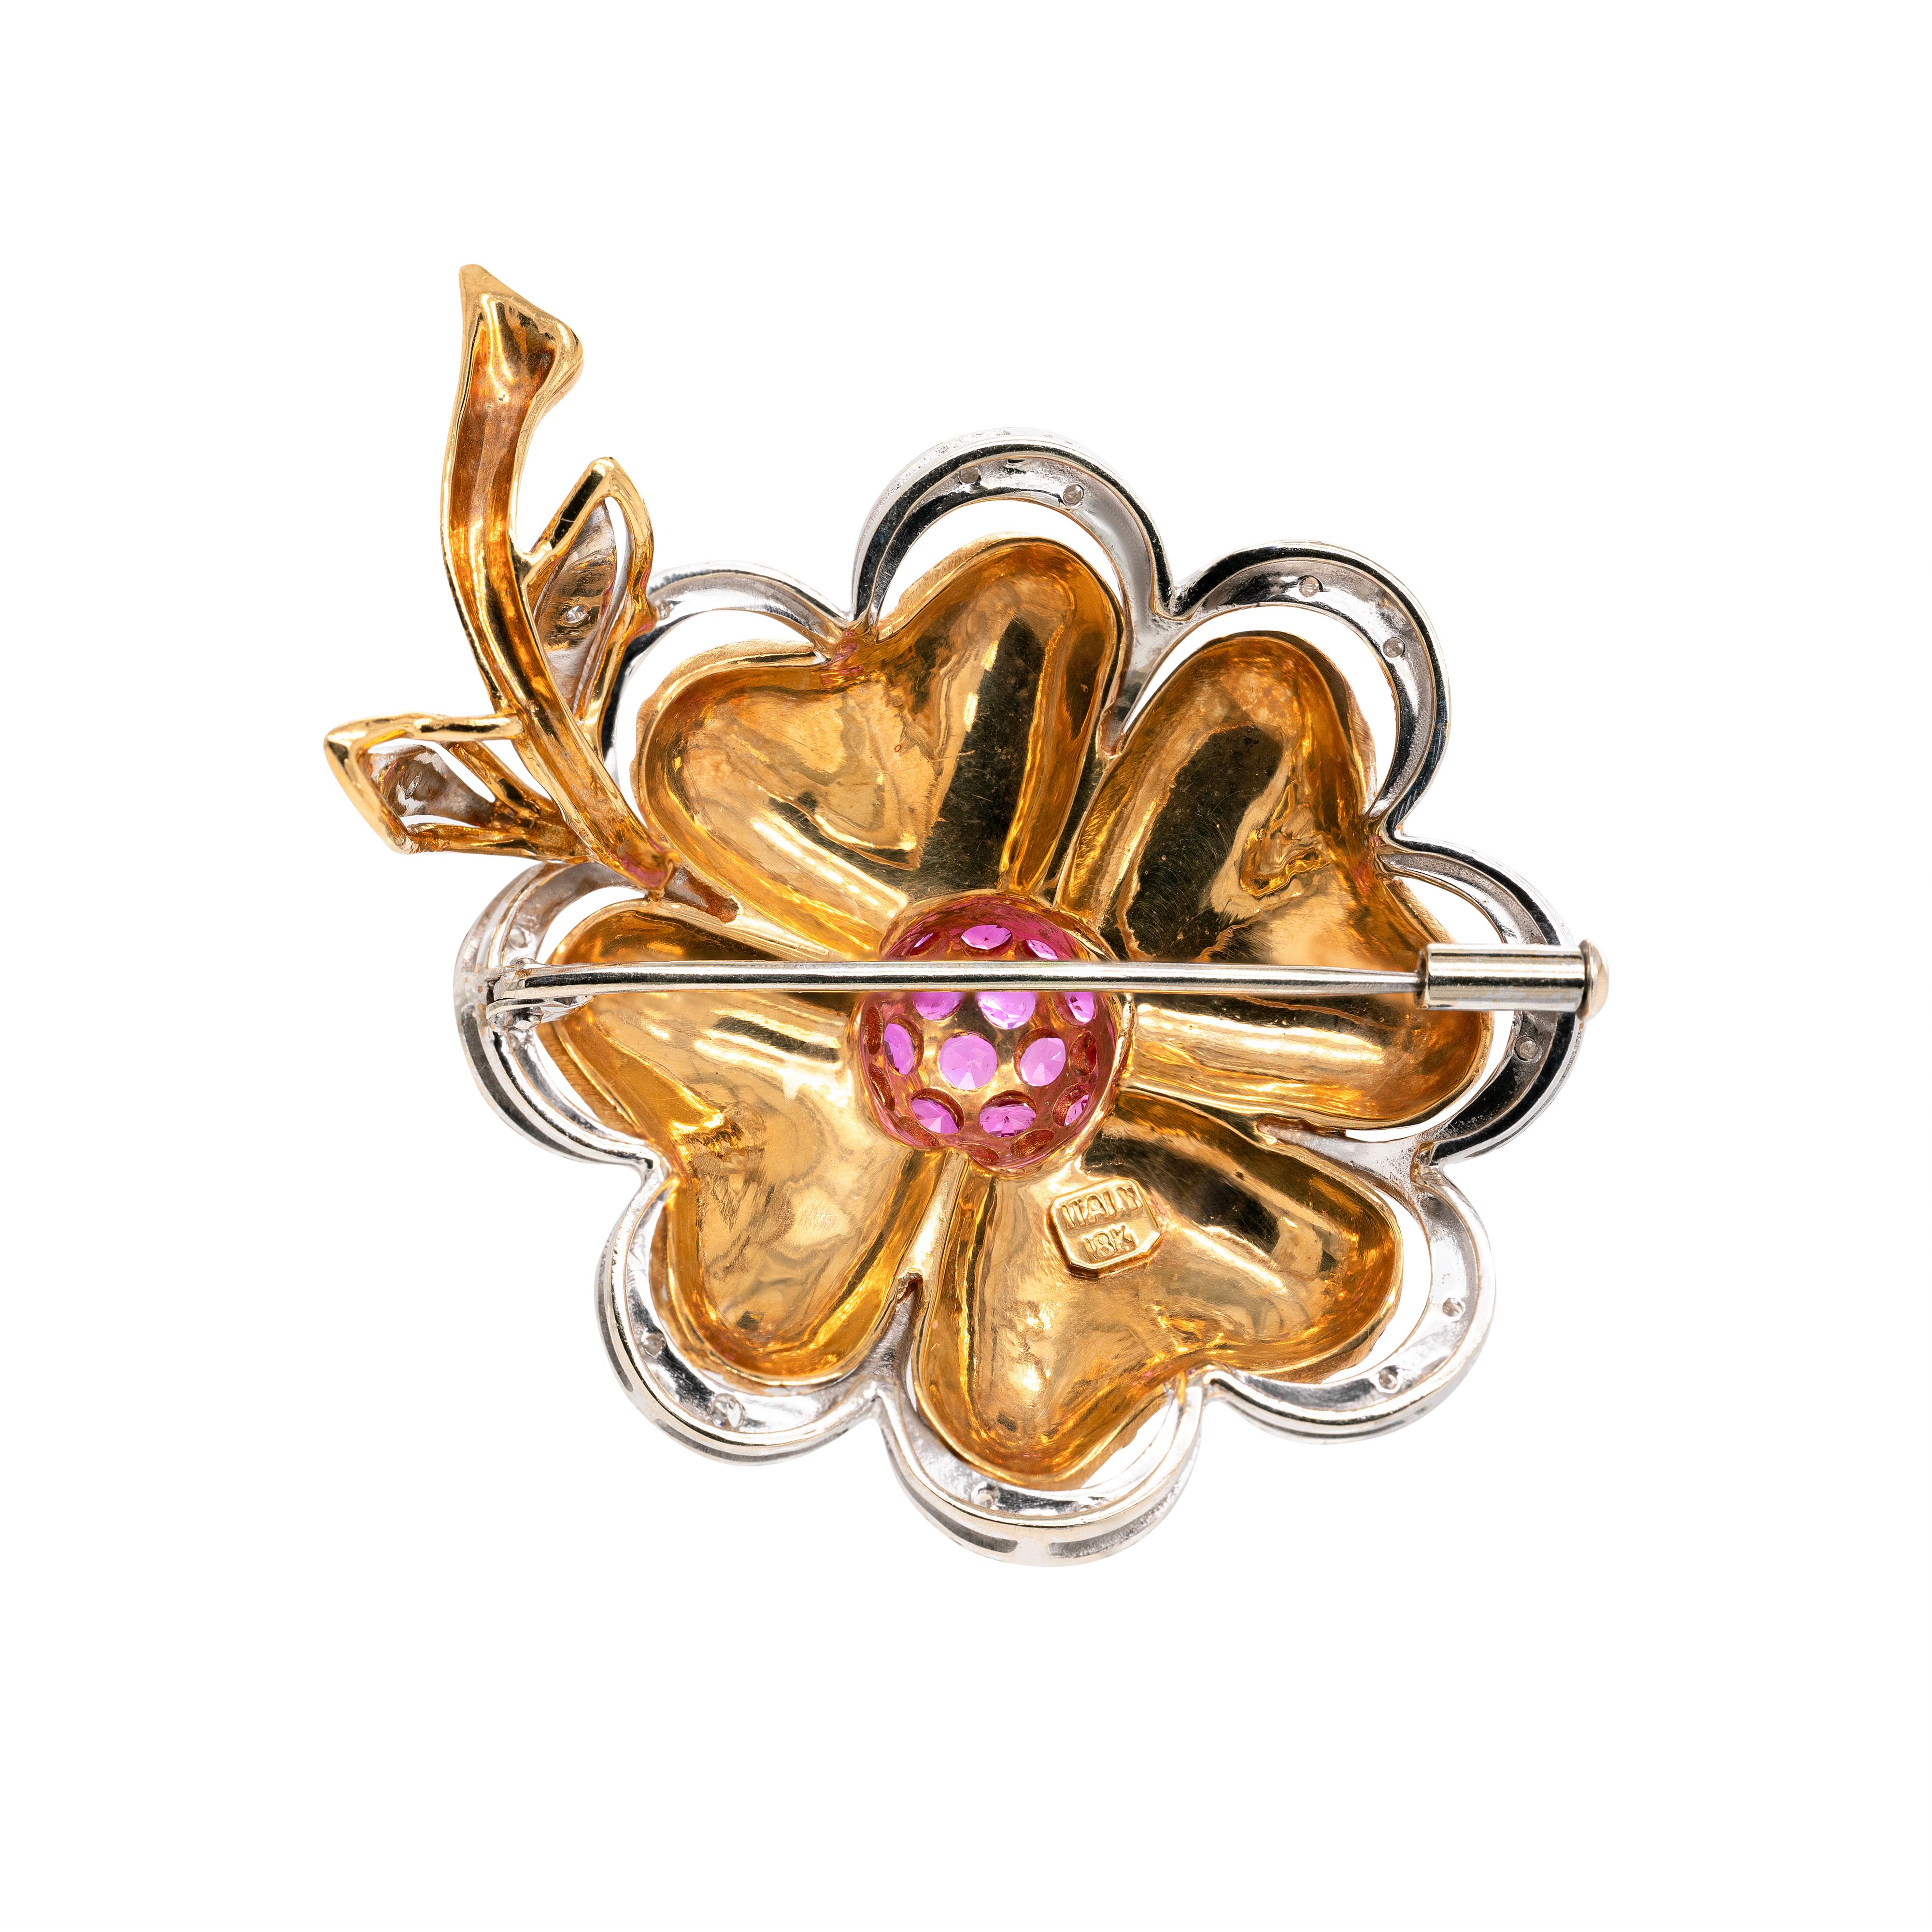 This charming brooch is beautifully designed with 19 round shaped vibrant rubies in the domed centre, weighing approximately 2.00ct combined. The flower's petals are crafted from scaled textured 18 carat yellow gold and highlighted by 18 carat white